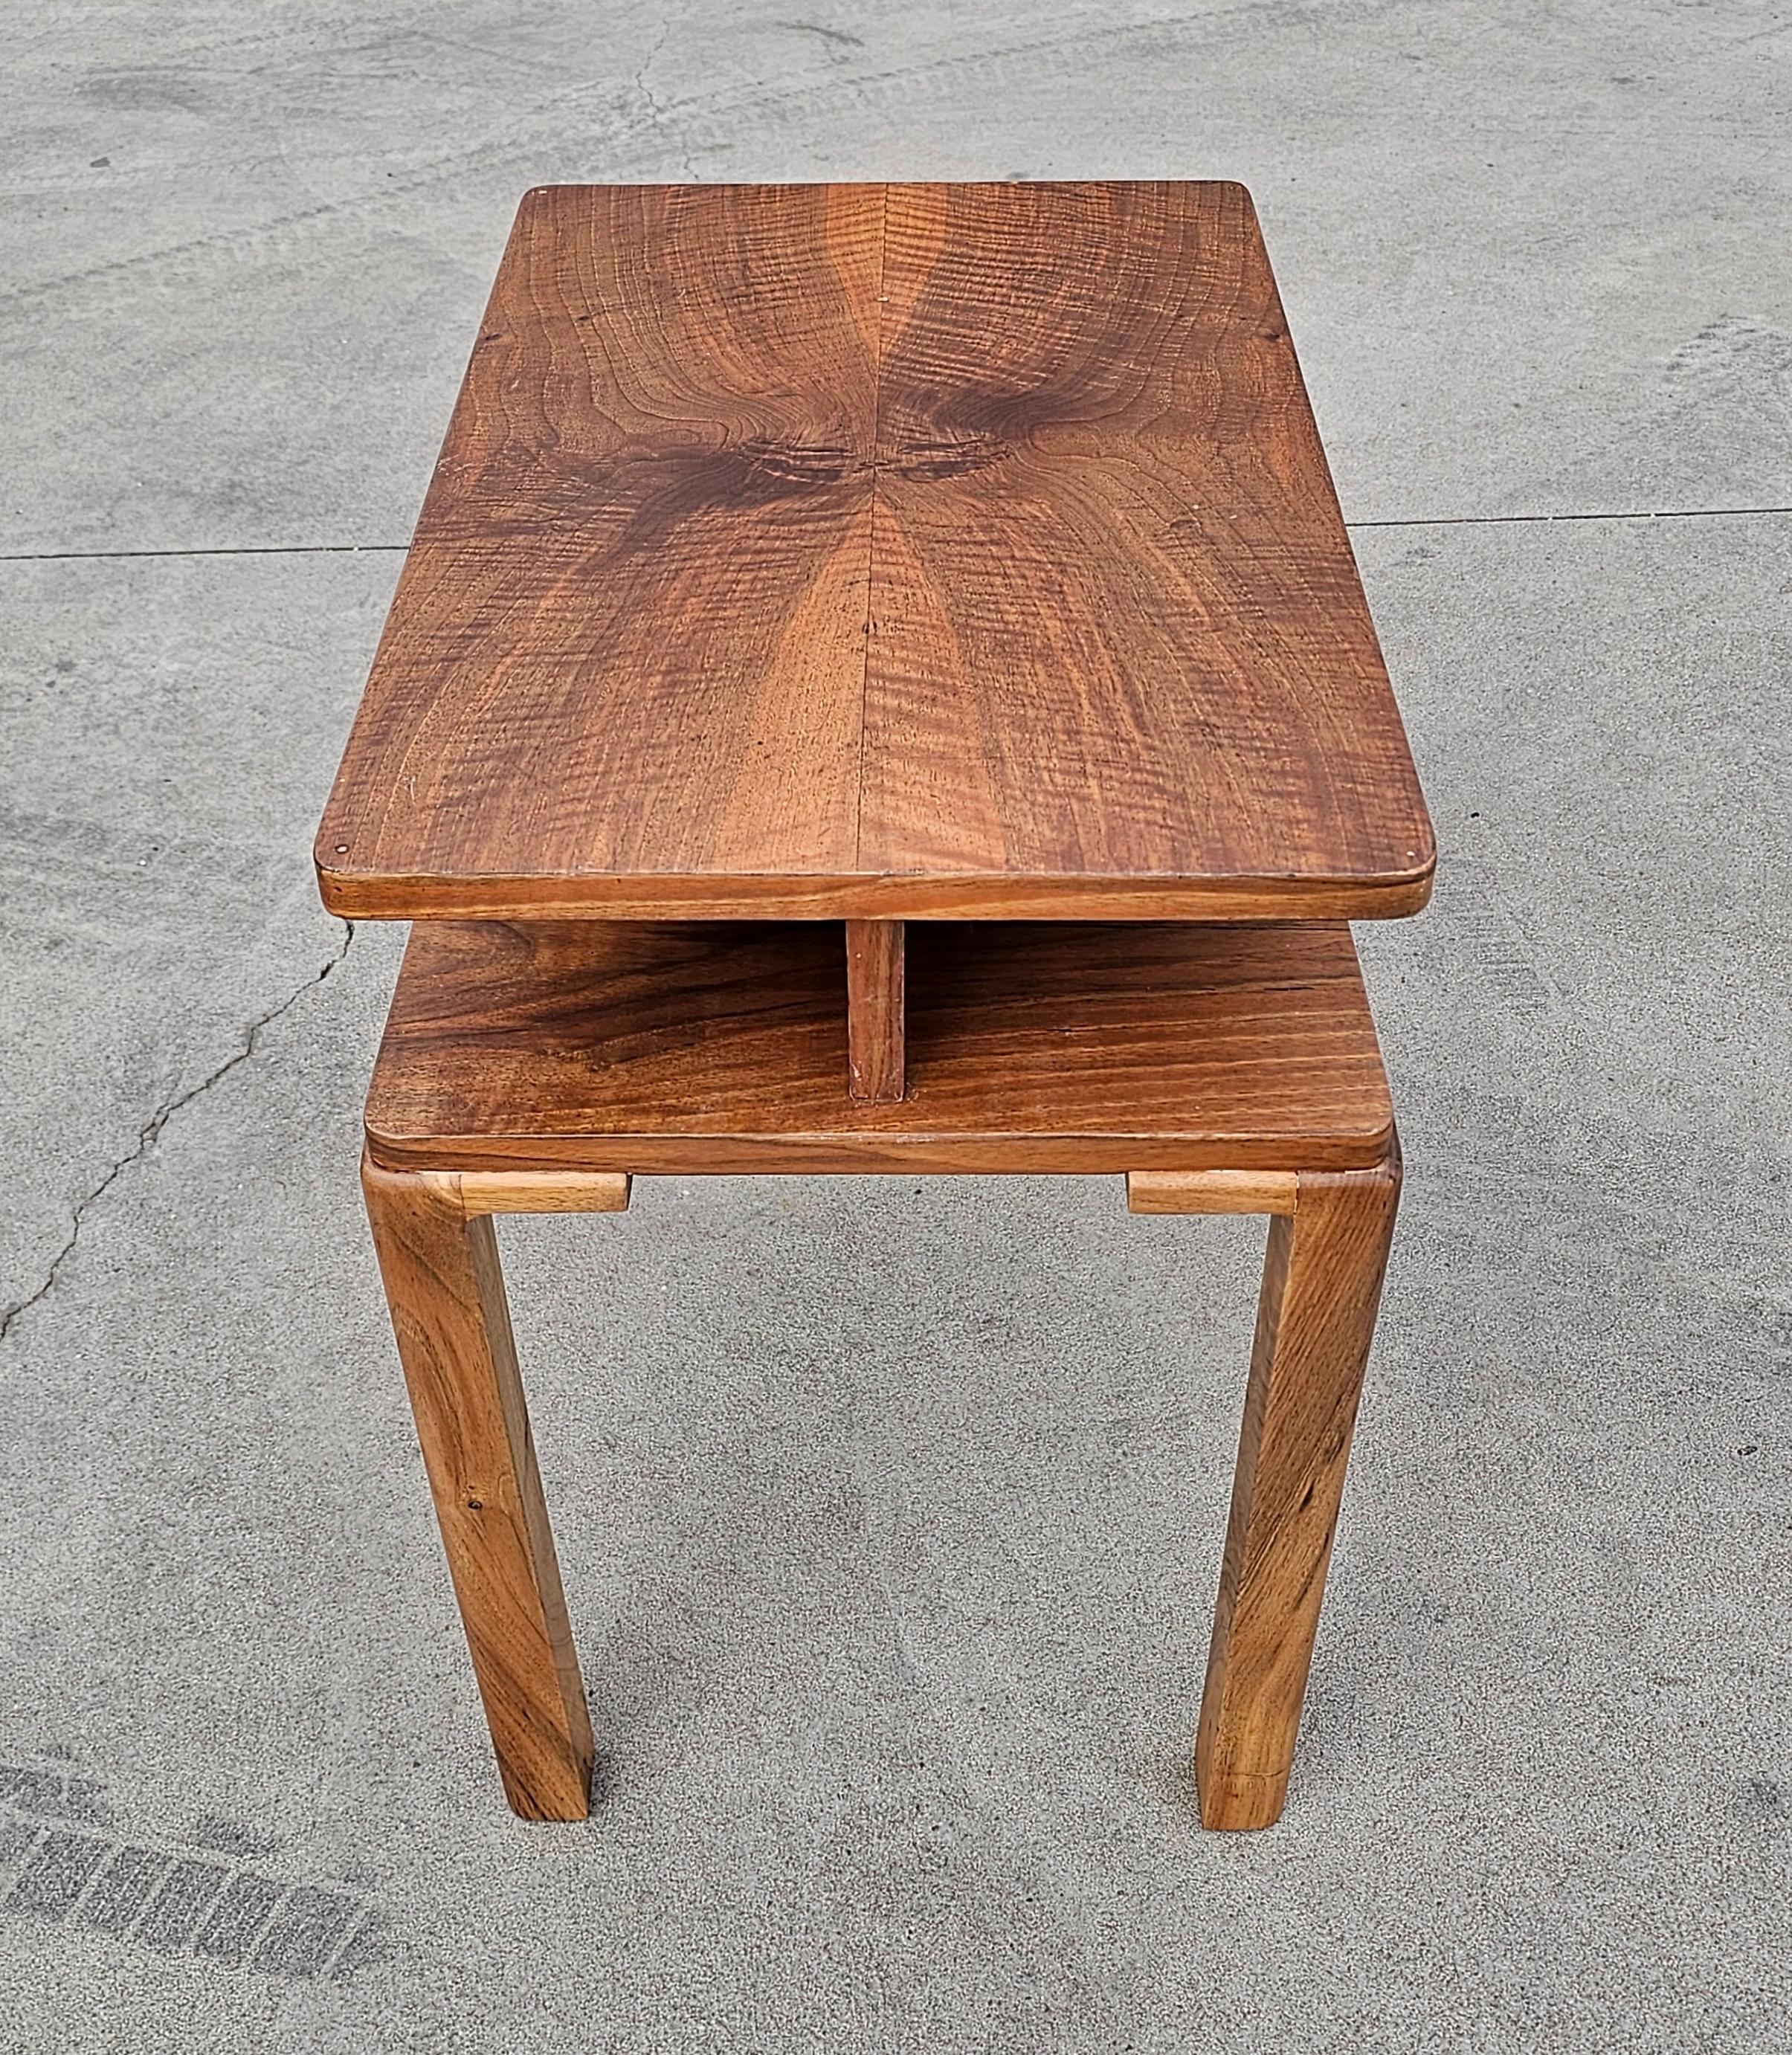 Mid-20th Century Rectangular Two Tiered Art Deco Walnut Side Table, Austria 1930s For Sale